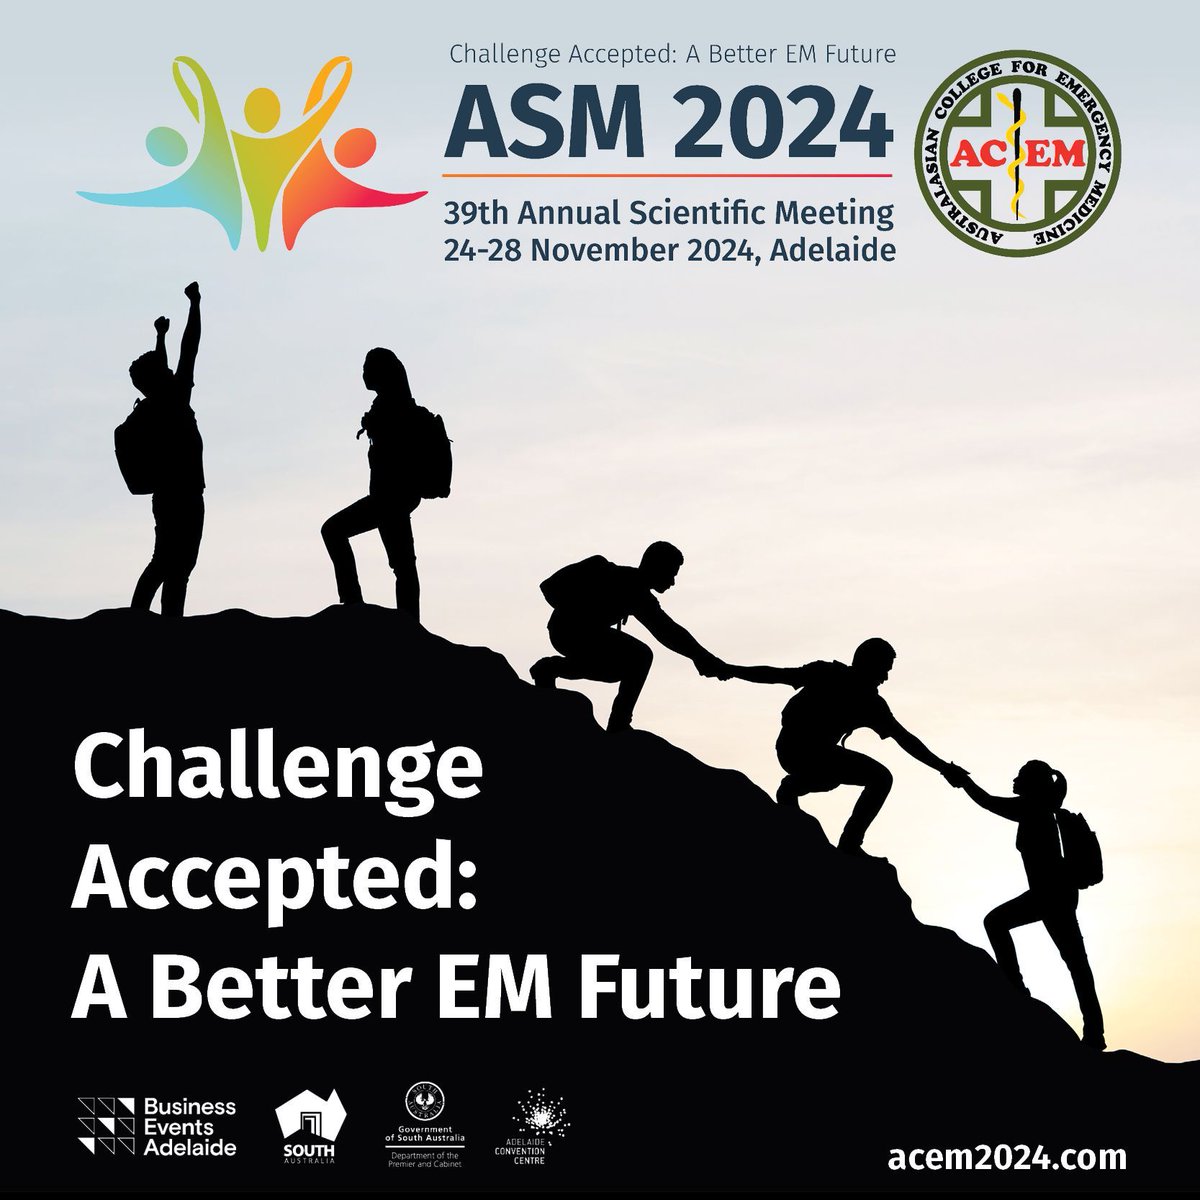 The ACEM Annual Scientific Meeting theme for 2024 is Challenge Accepted: A Better EM Future. Join us in Adelaide from 24 to 28 Nov. and listen to the latest research, collaborate with peers, and chart a course for a more resilient future in EM. acem2024.com #ACEM24